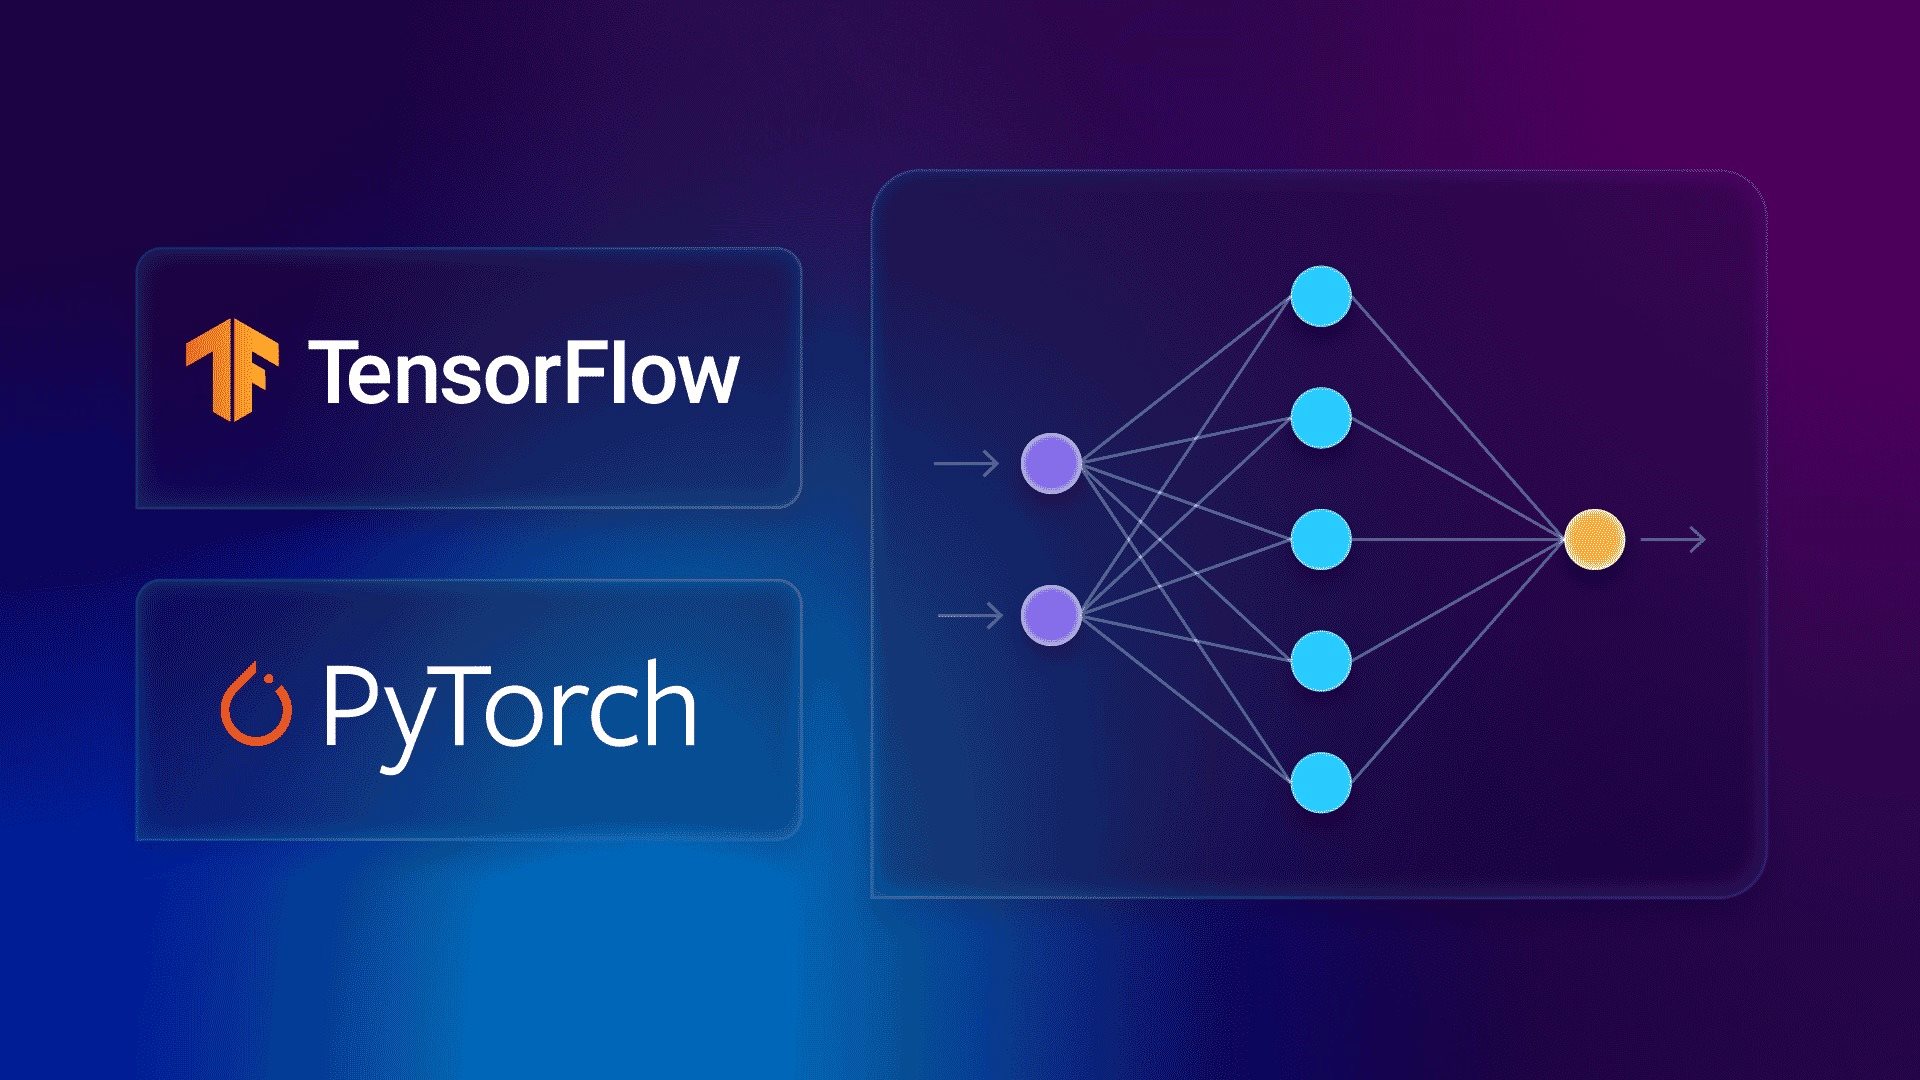 TensorFlow And PyTorch Are Which Type Of Machine Learning